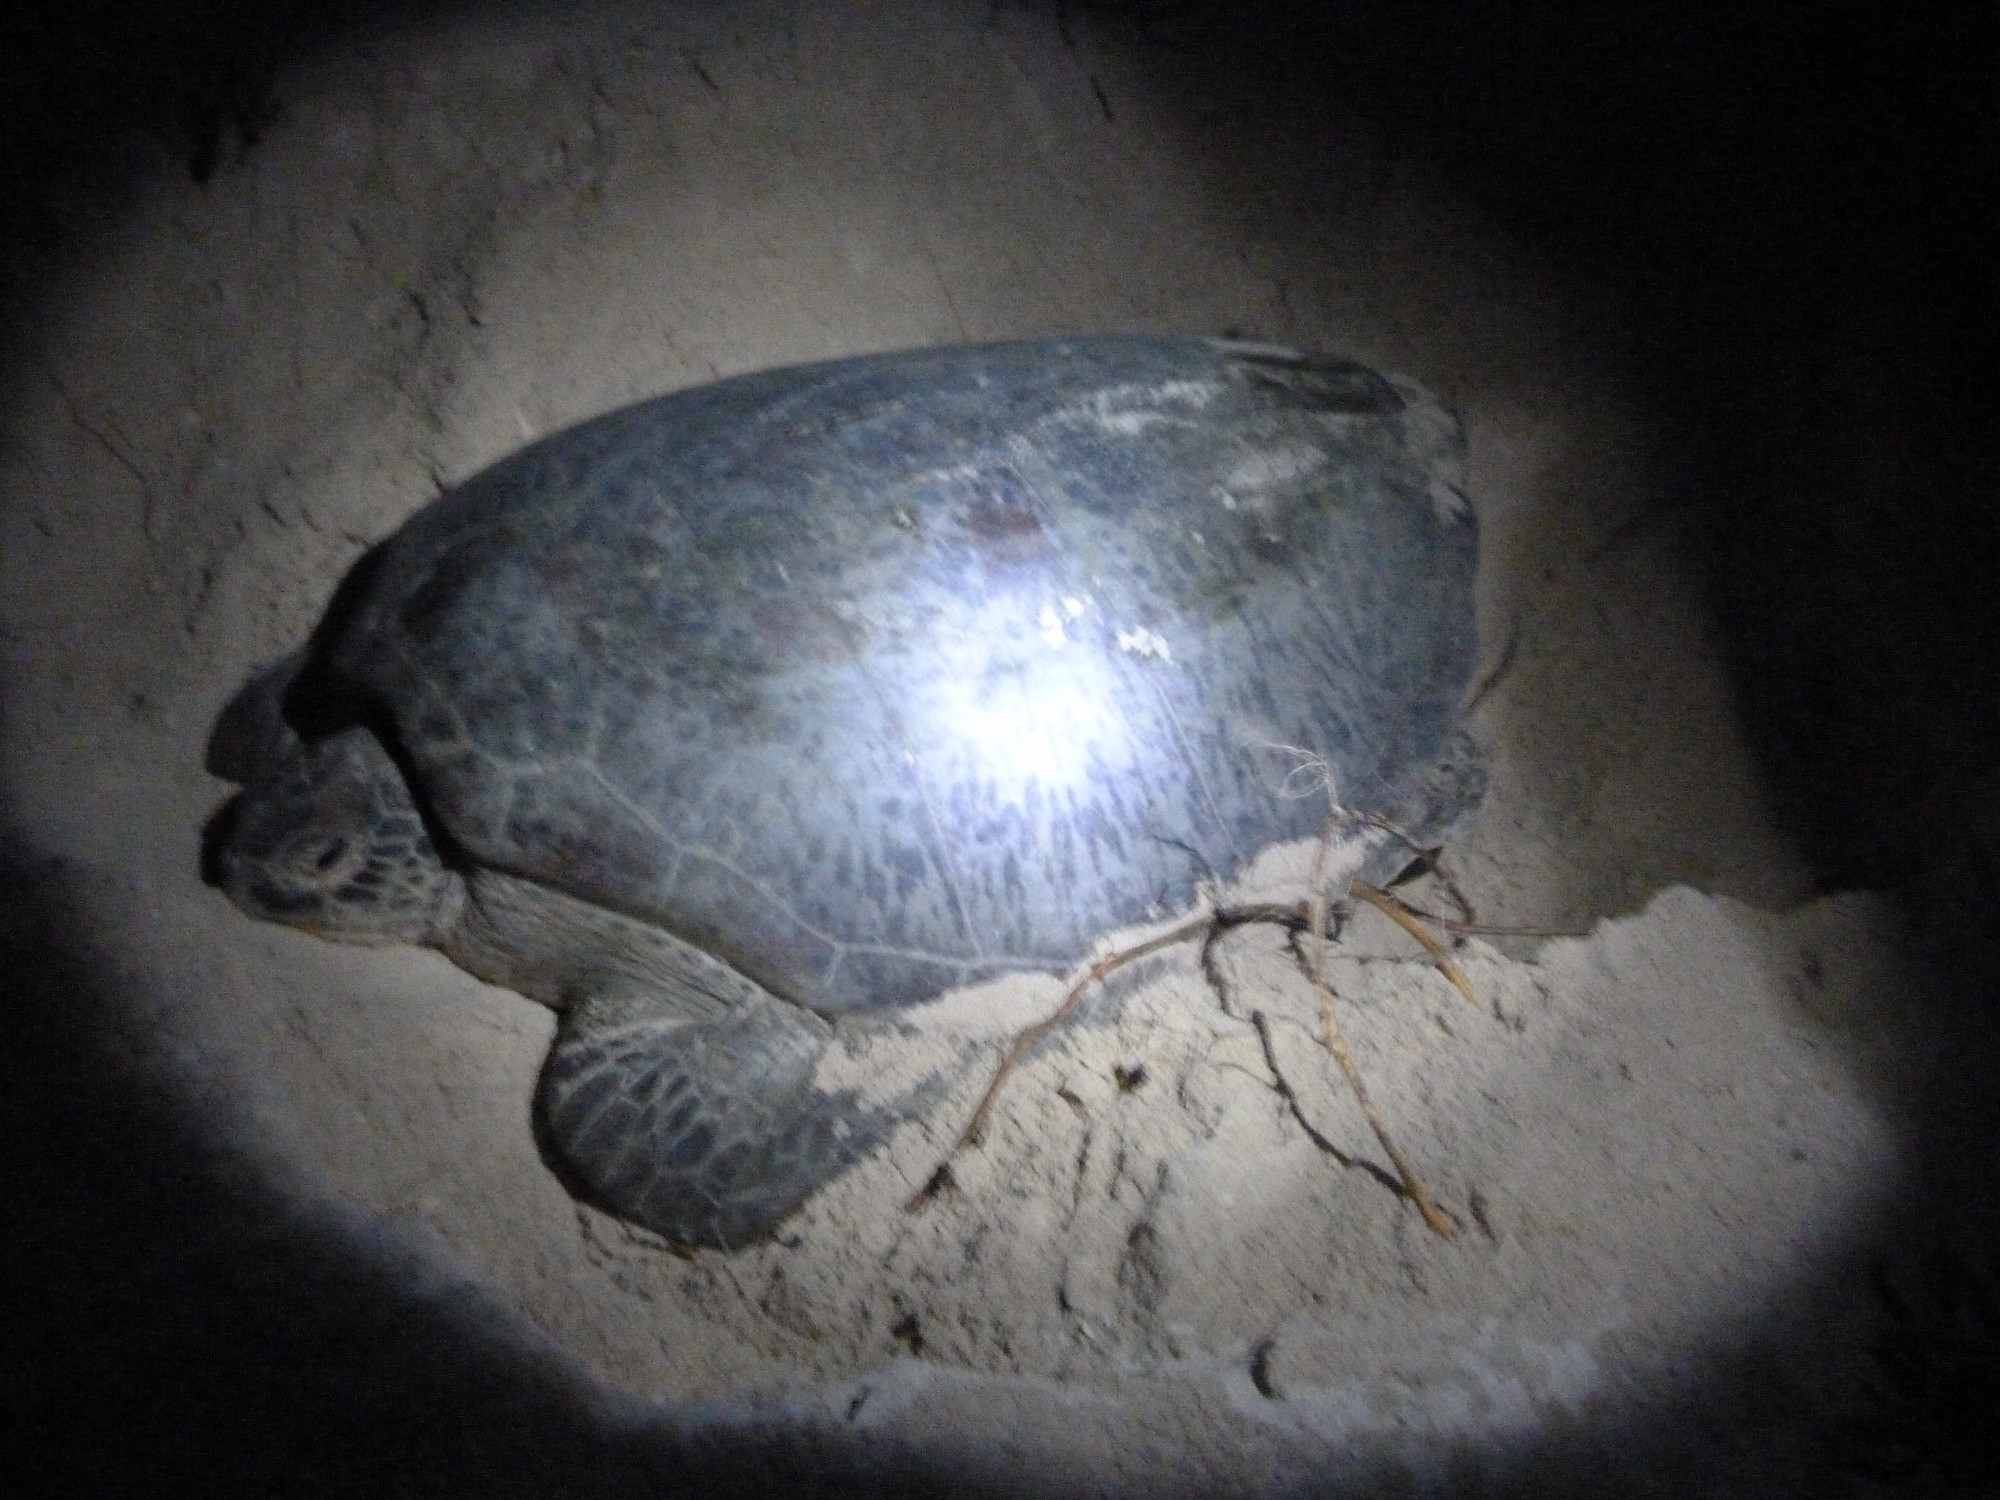 Turtle Conservation and Information Centre, Malaysia